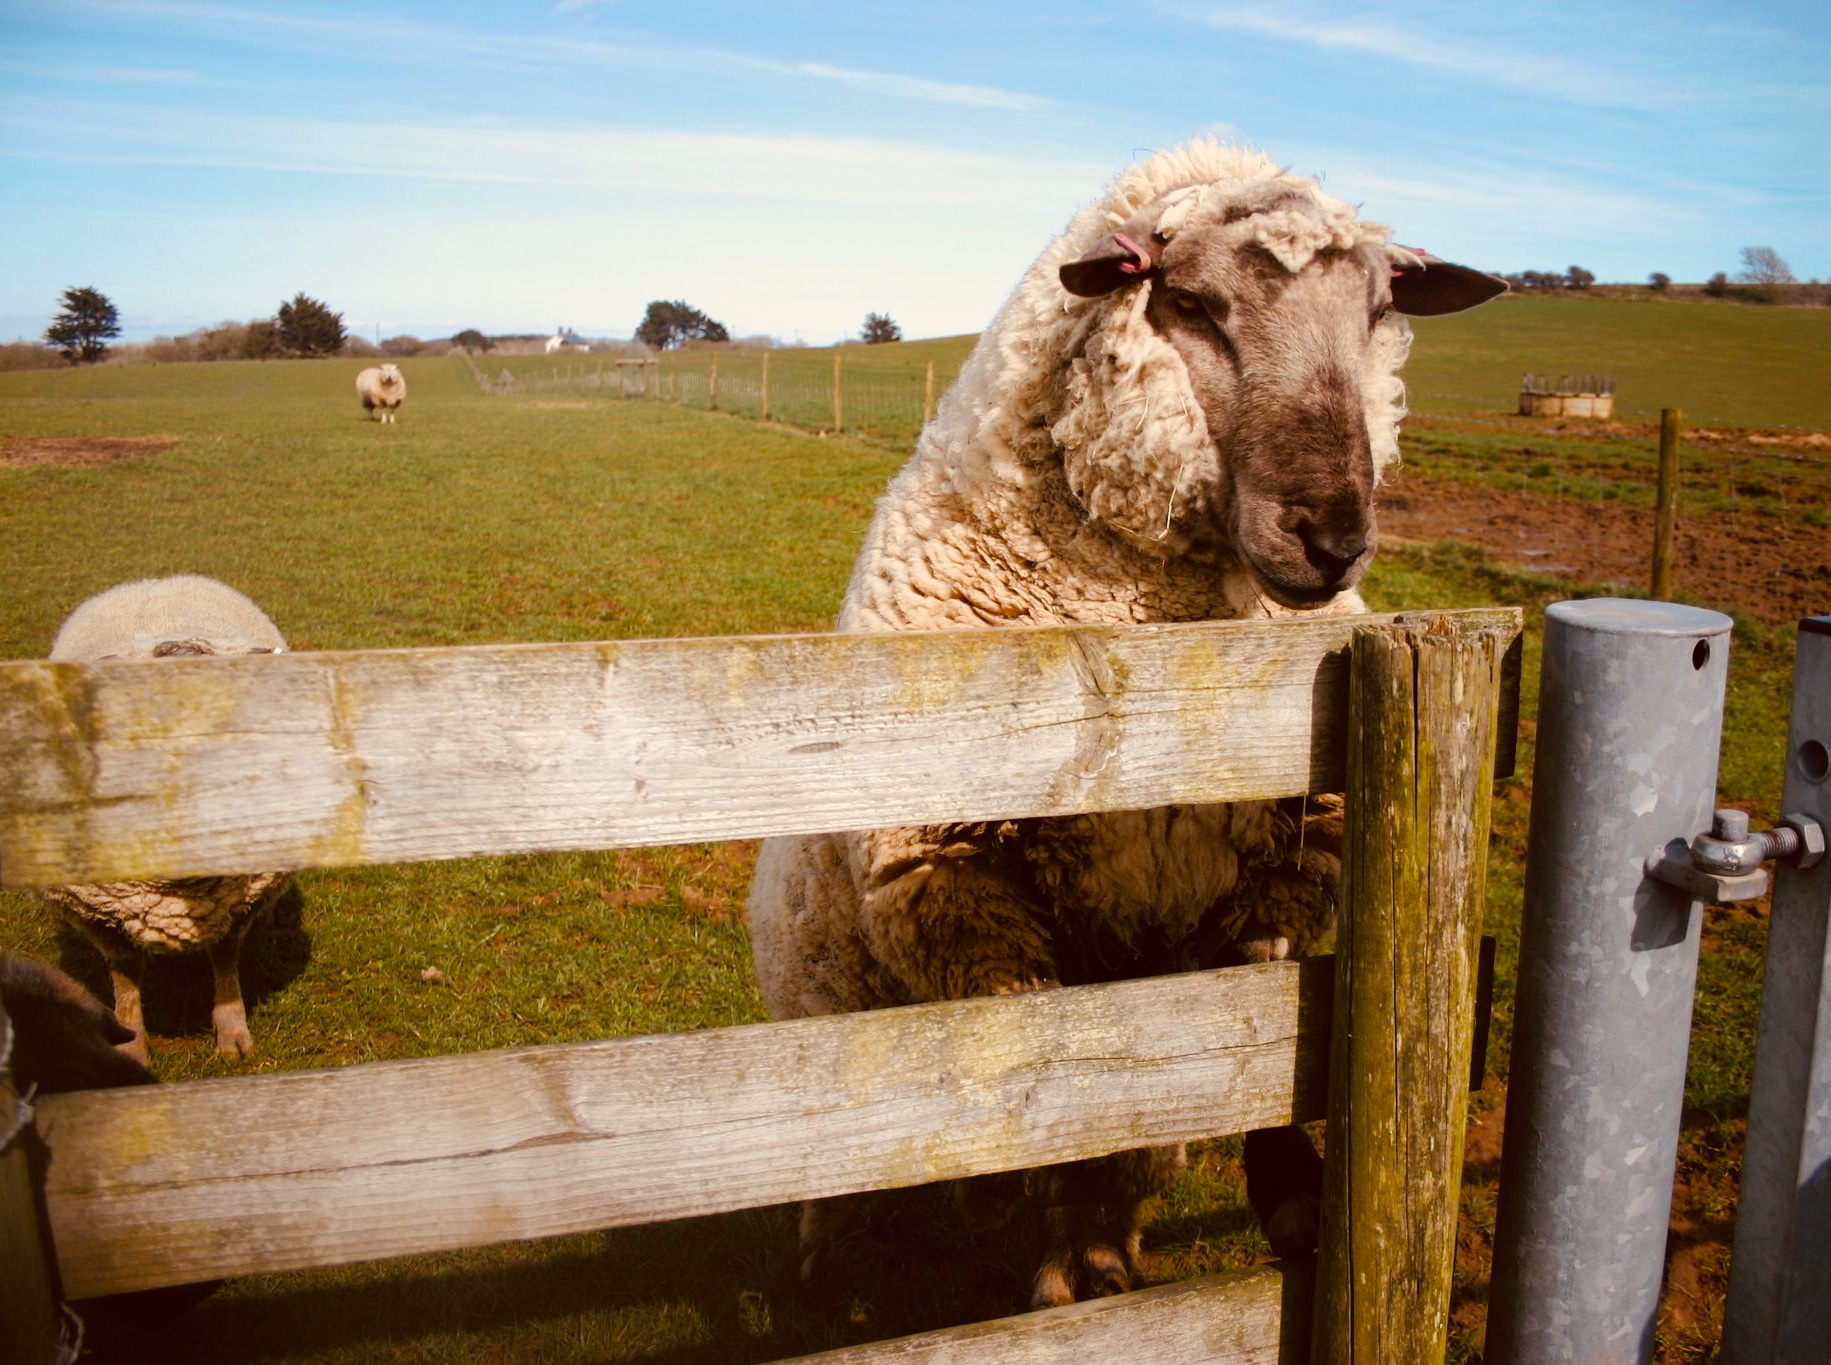 Isle of Wight County Press: Taken by Jake, 11, meeting a friendly sheep in Chale